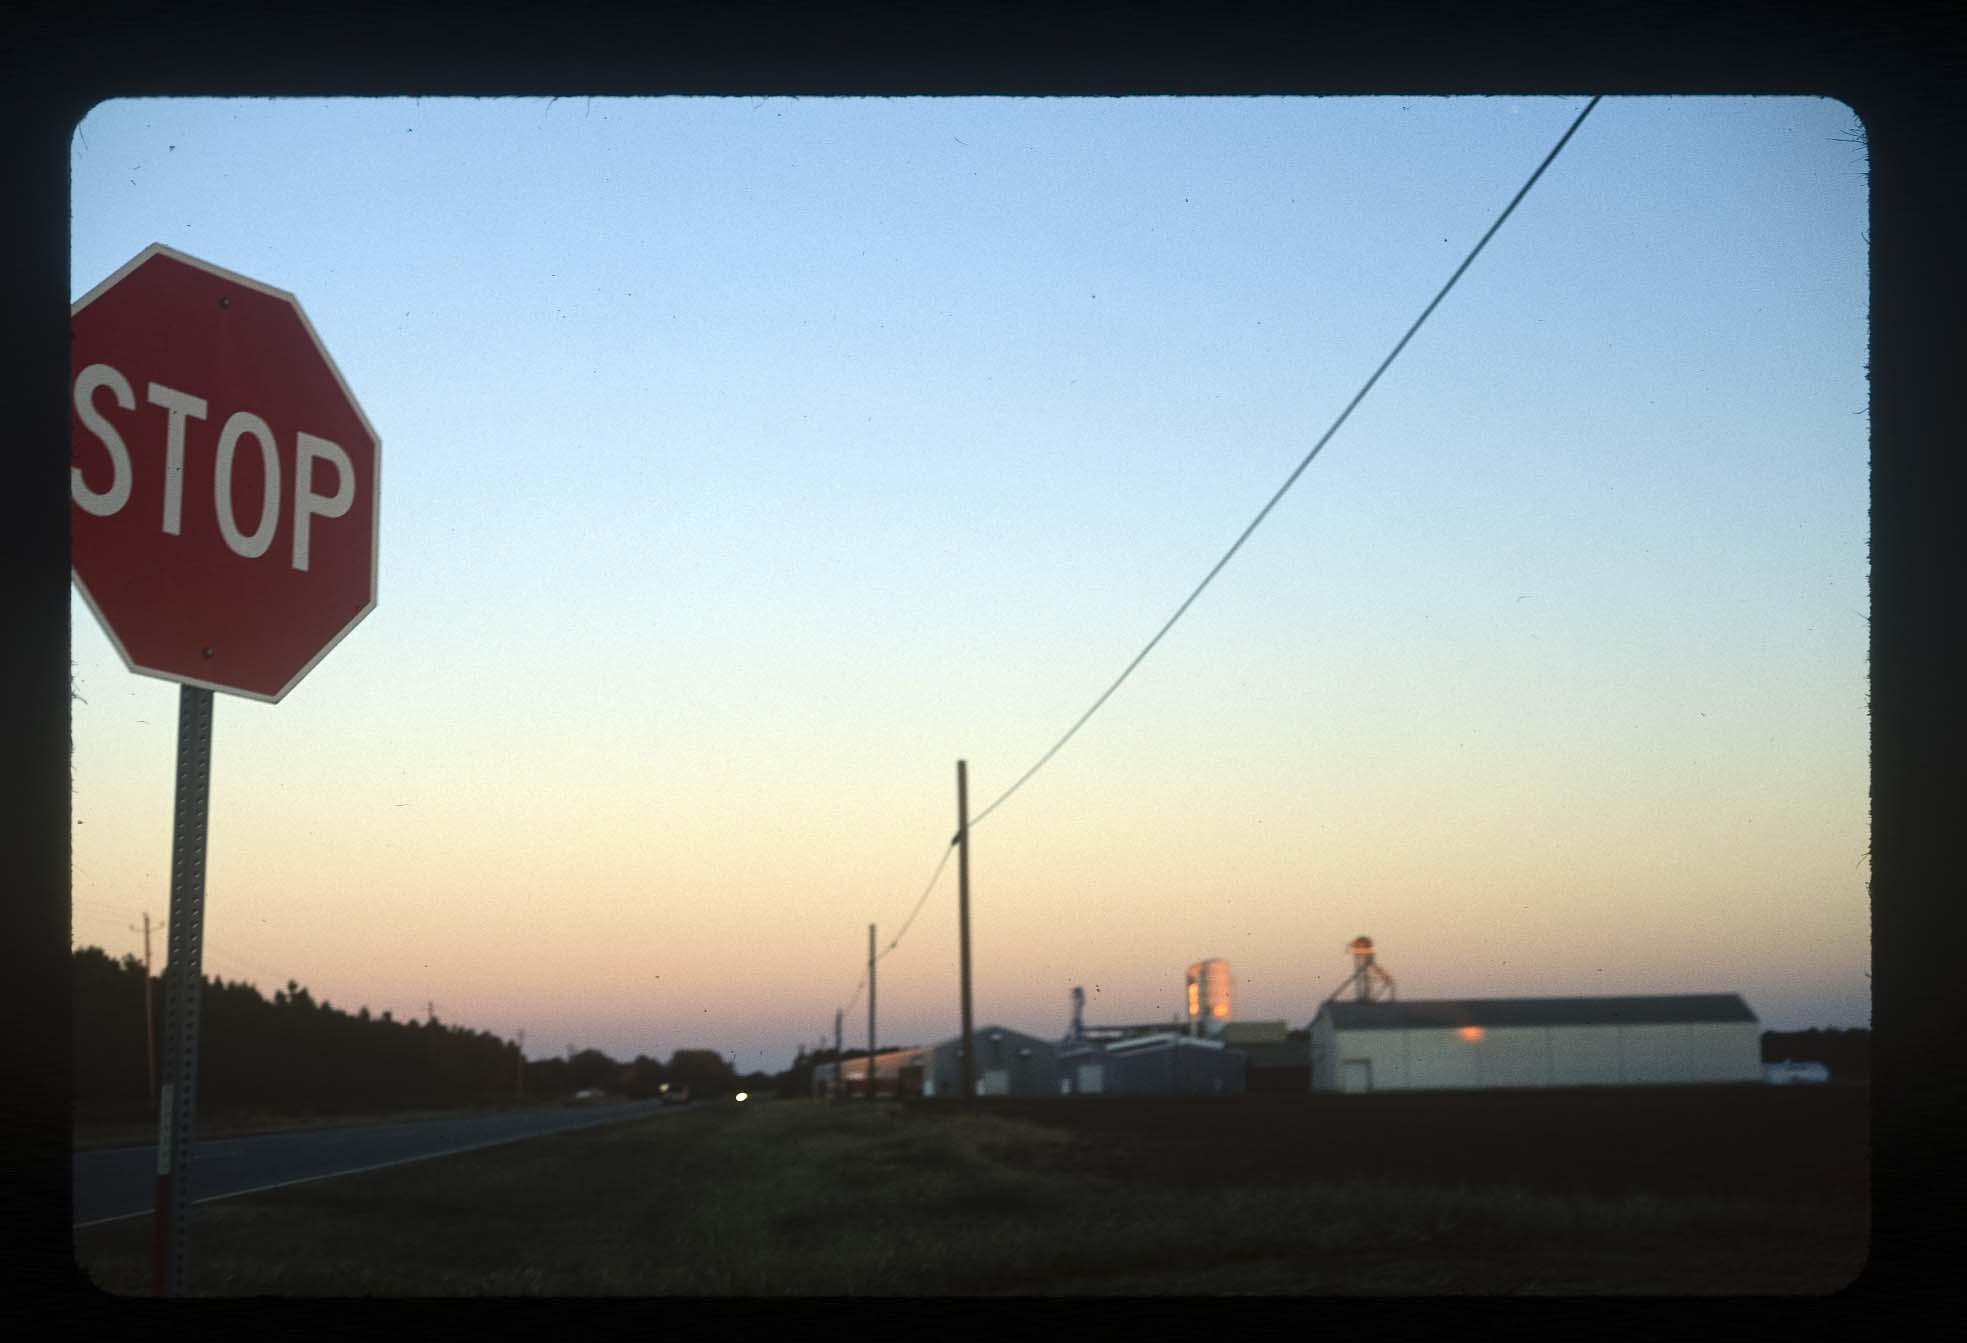 View of a stop sign, street, and buildings during a sunset